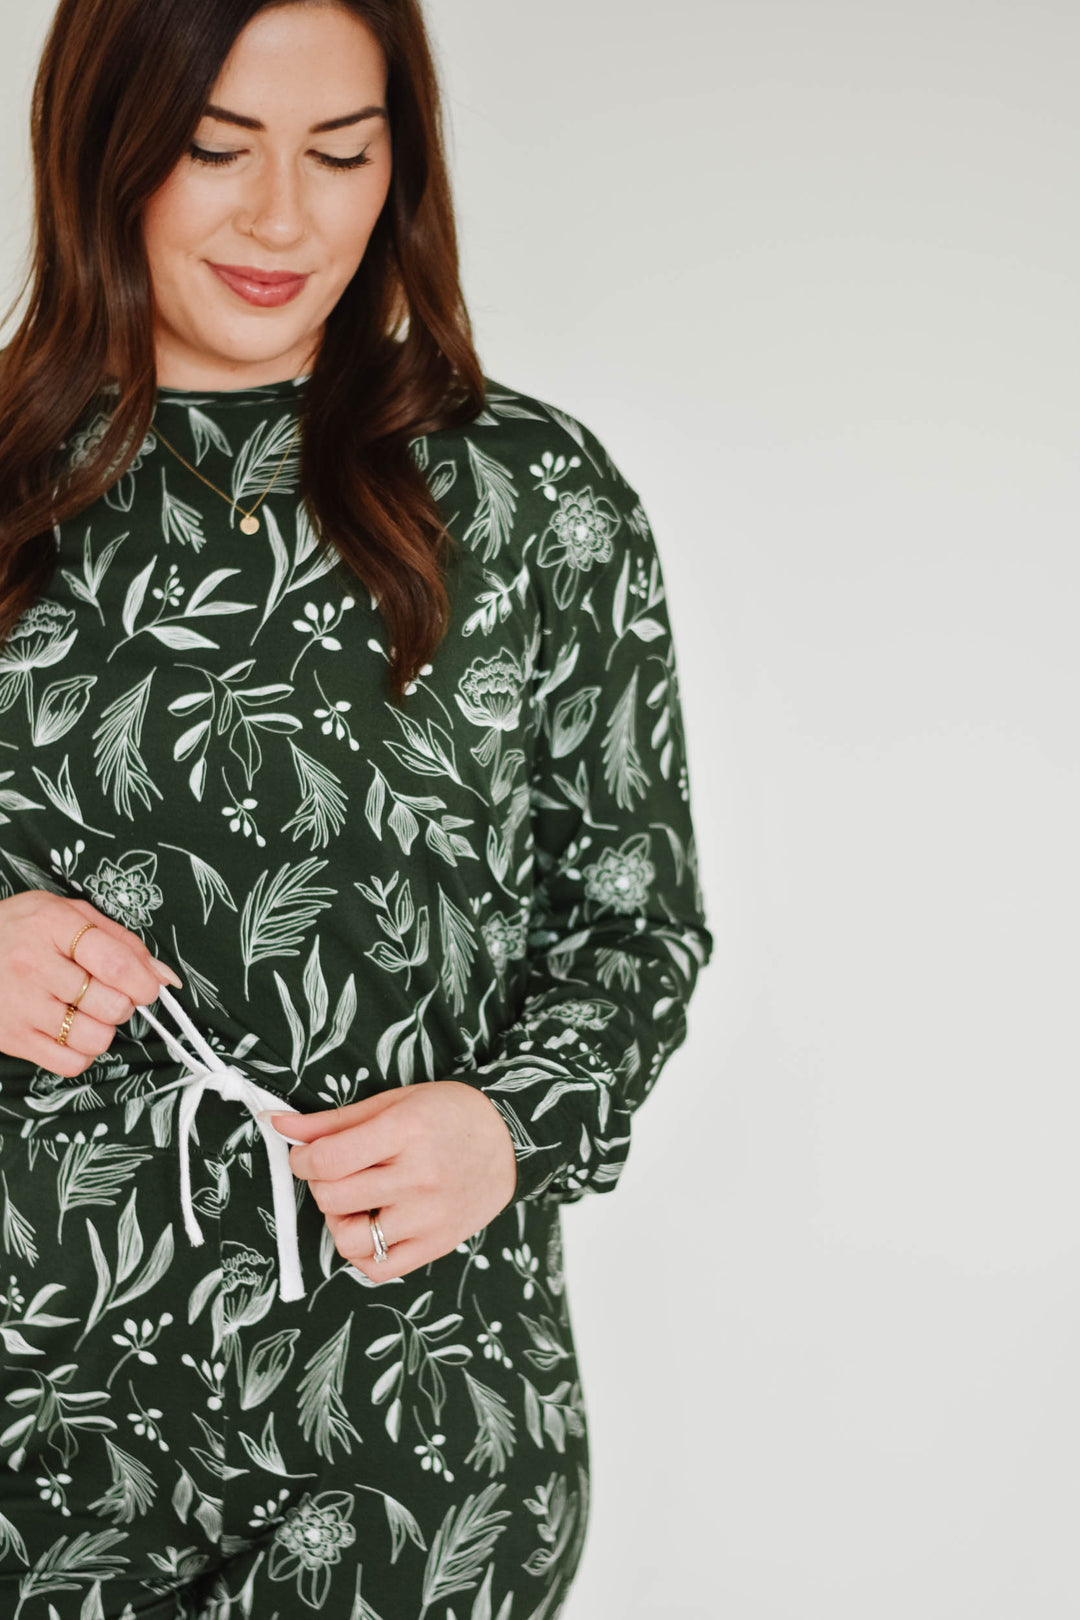 MAD Collection PJS - Balsam Floral